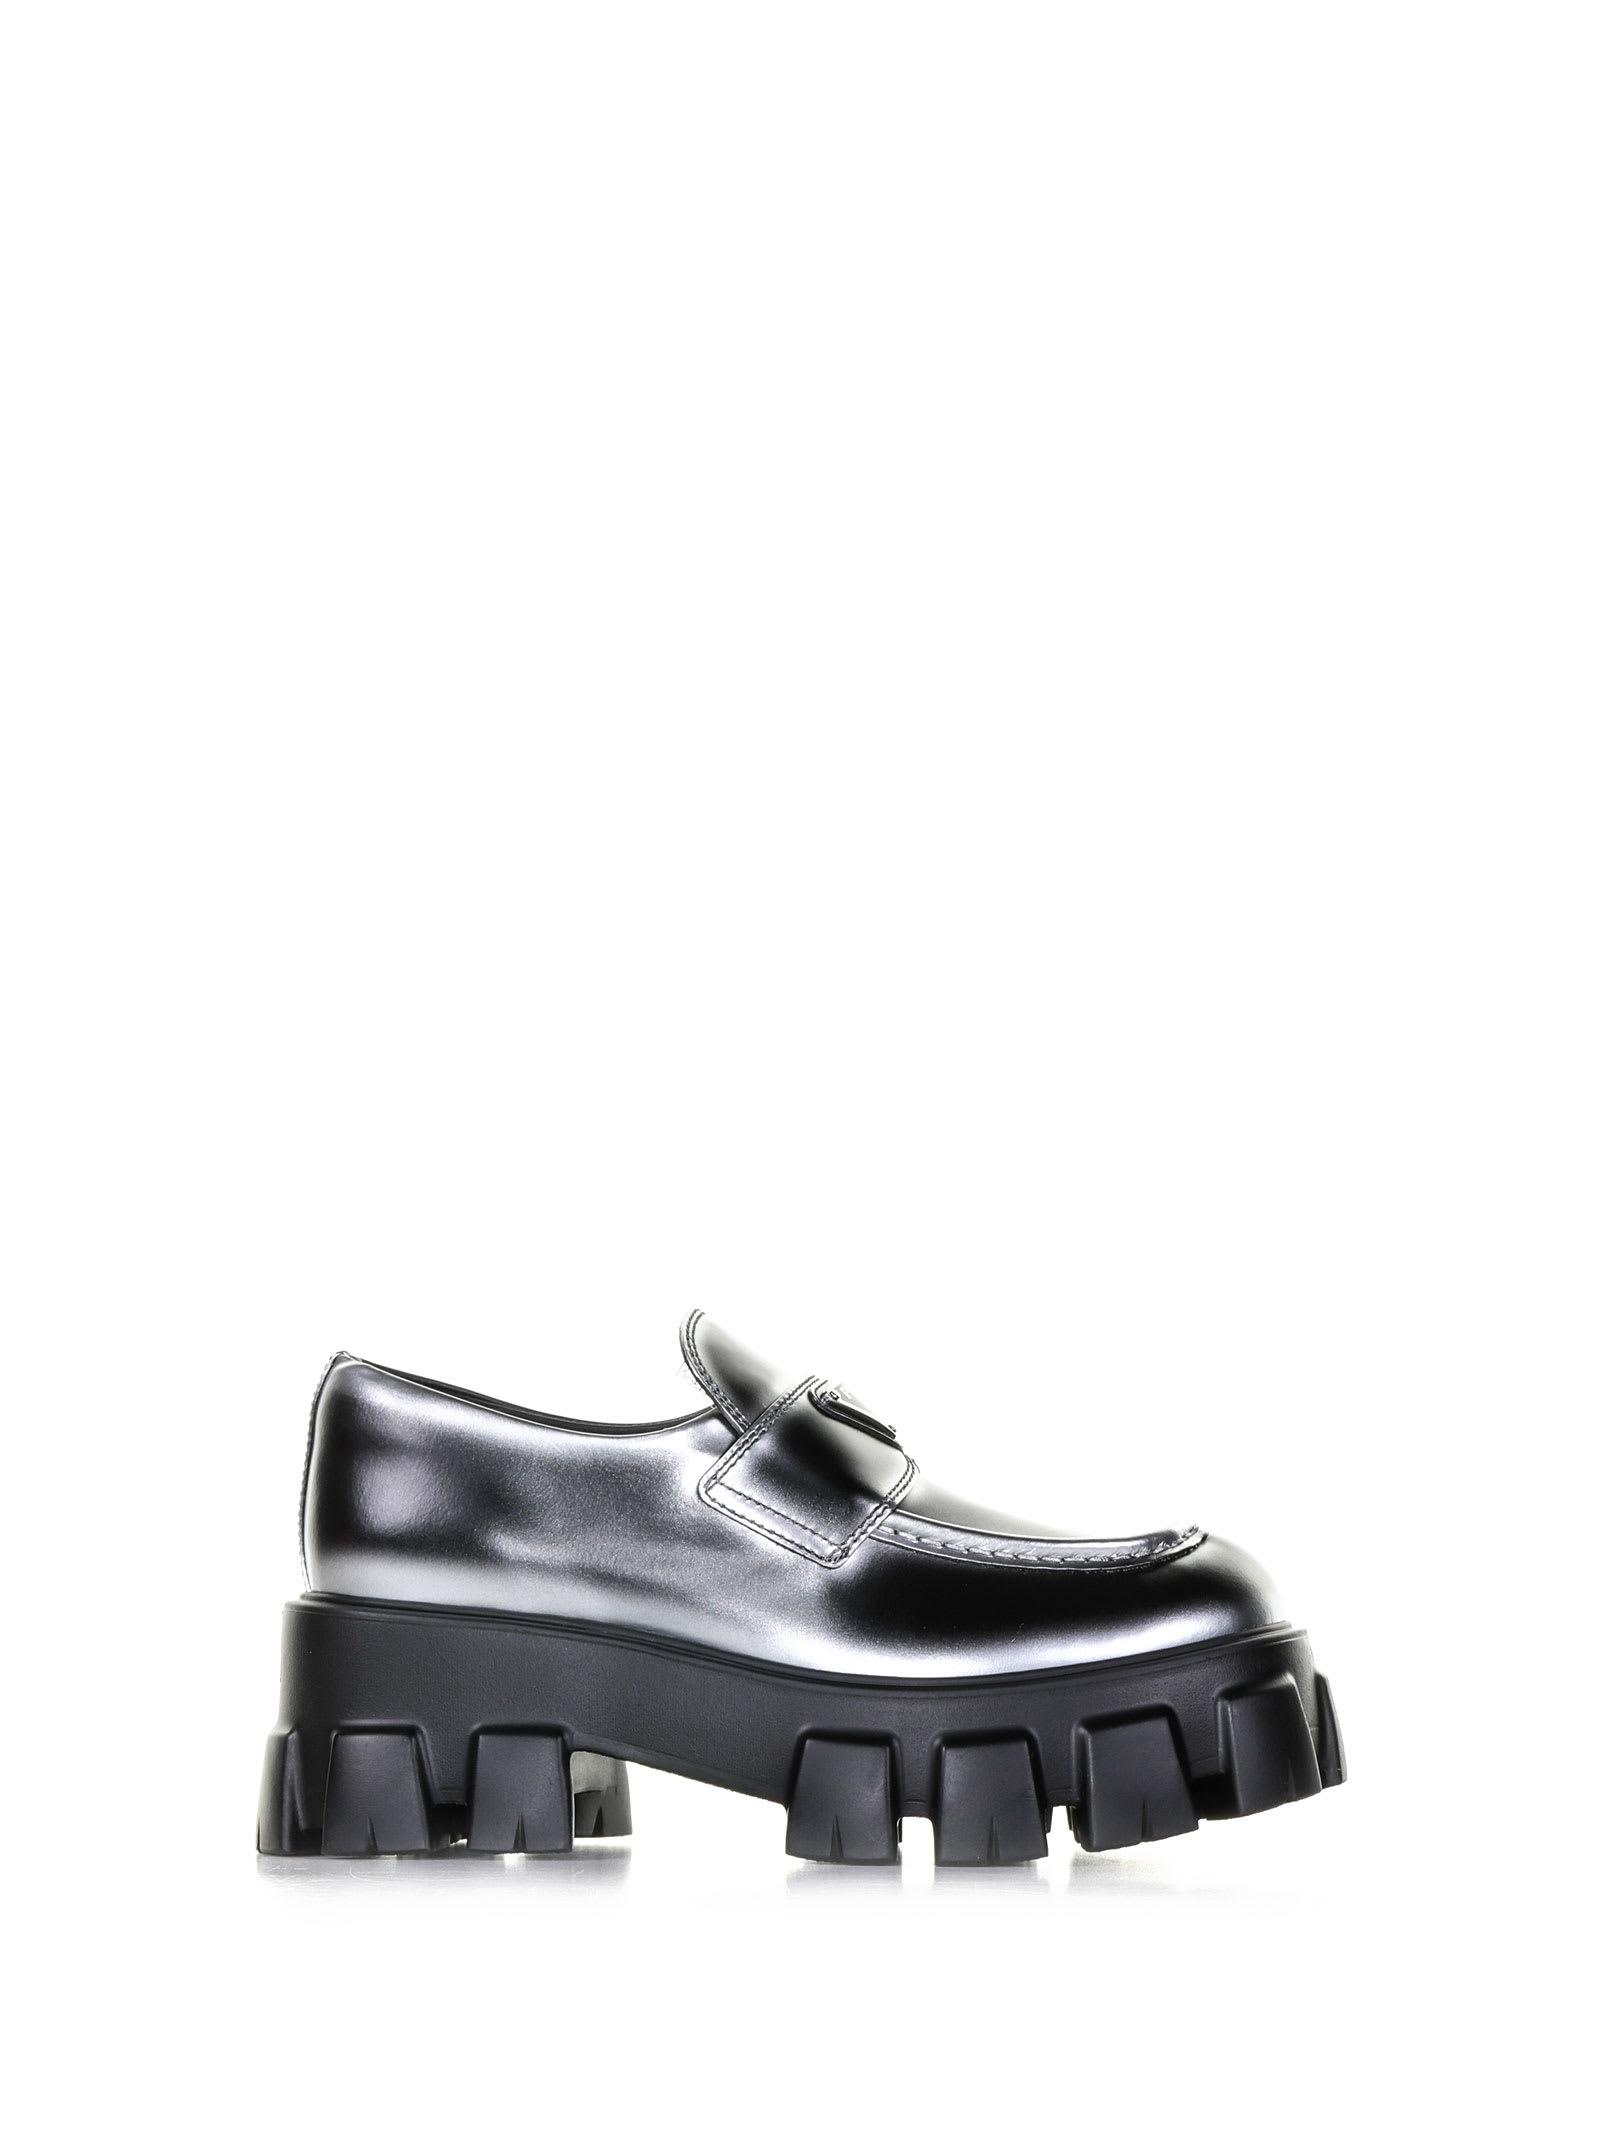 Prada Monolith Loafers In Leather in White | Lyst